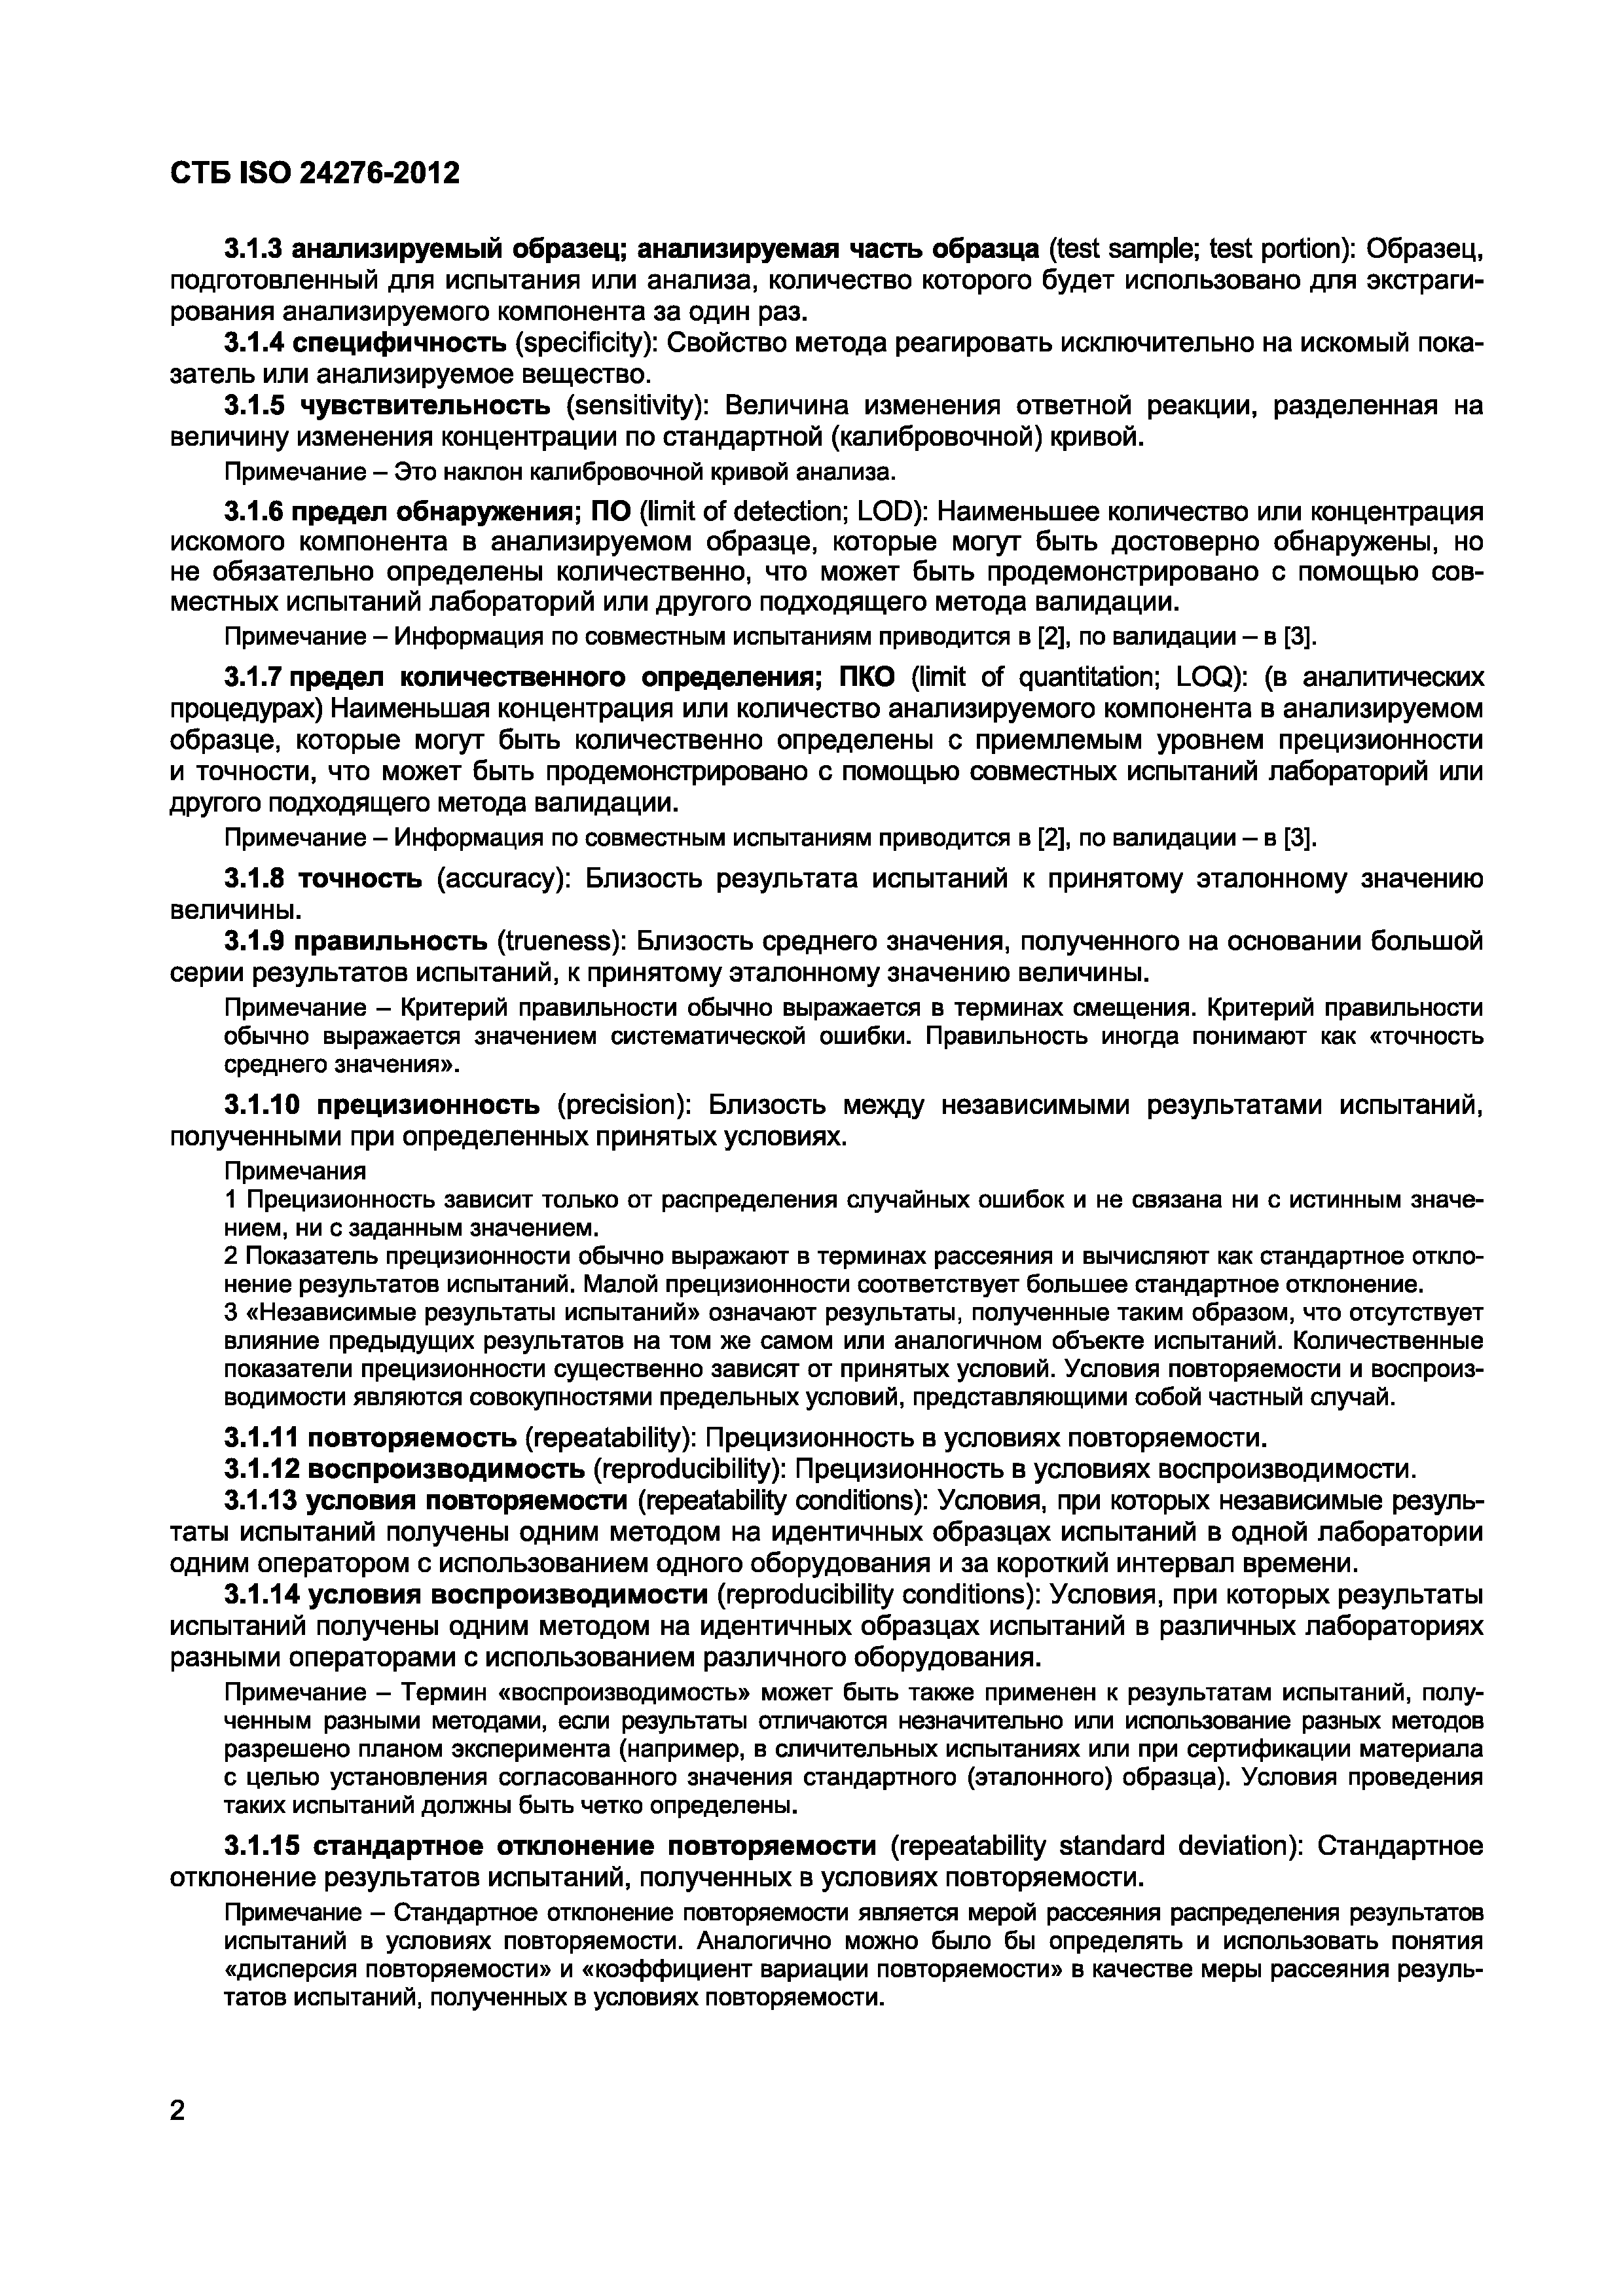 СТБ ISO 24276-2012